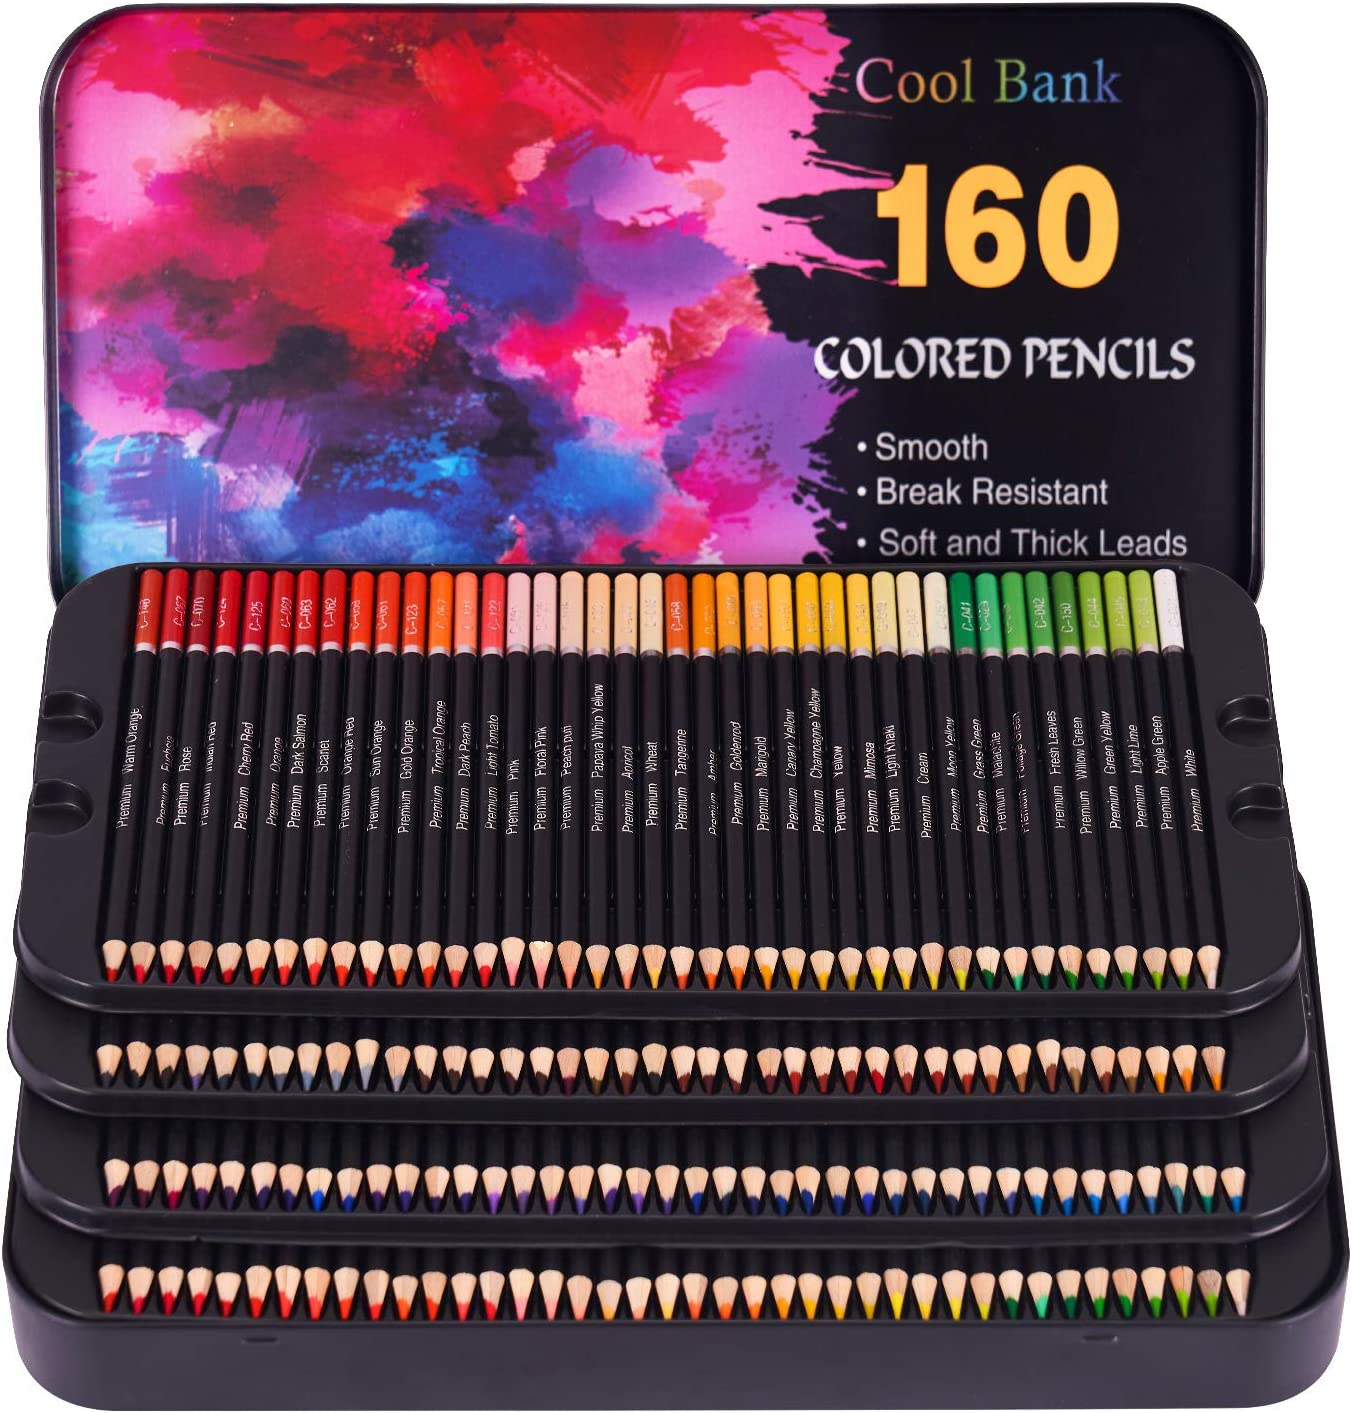 160 Professional Colored Pencils, Artist Pencils Set for Coloring Books, Premium Artist Soft Series Lead with Vibrant Colors for Sketching, Shading & Coloring in Tin Box - image 1 of 7